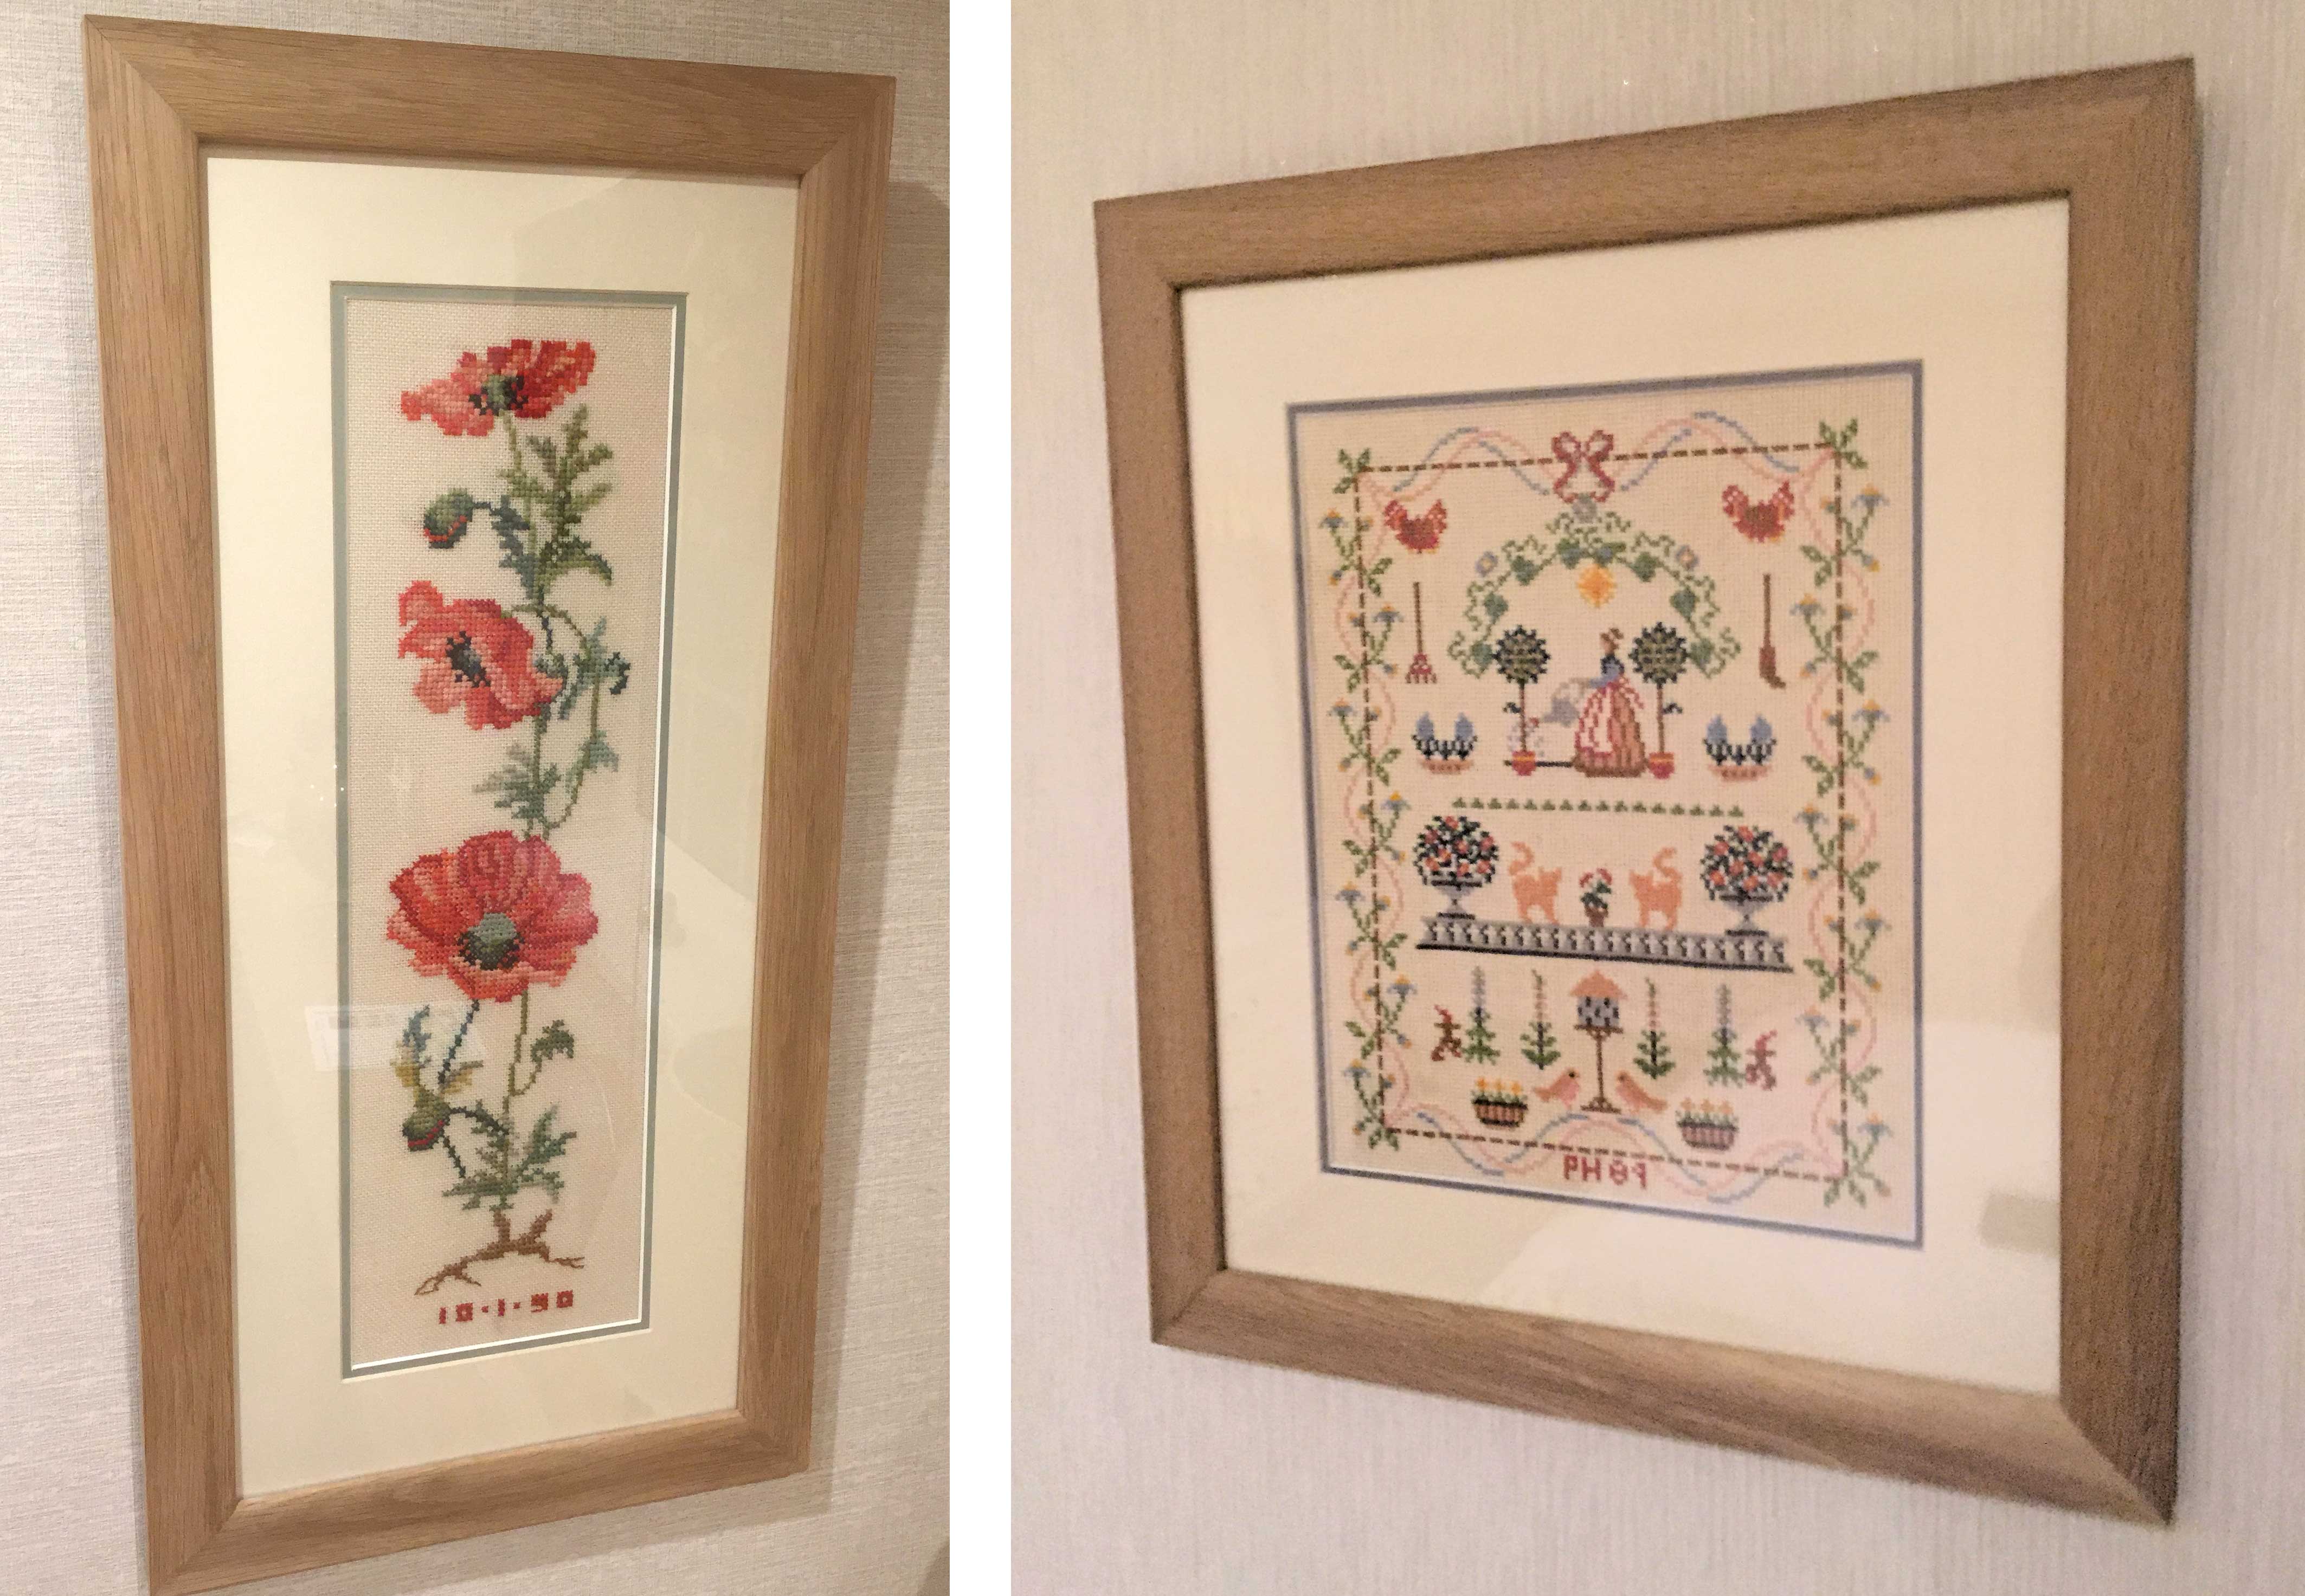 Needle point and cross stitch work mounted and framed